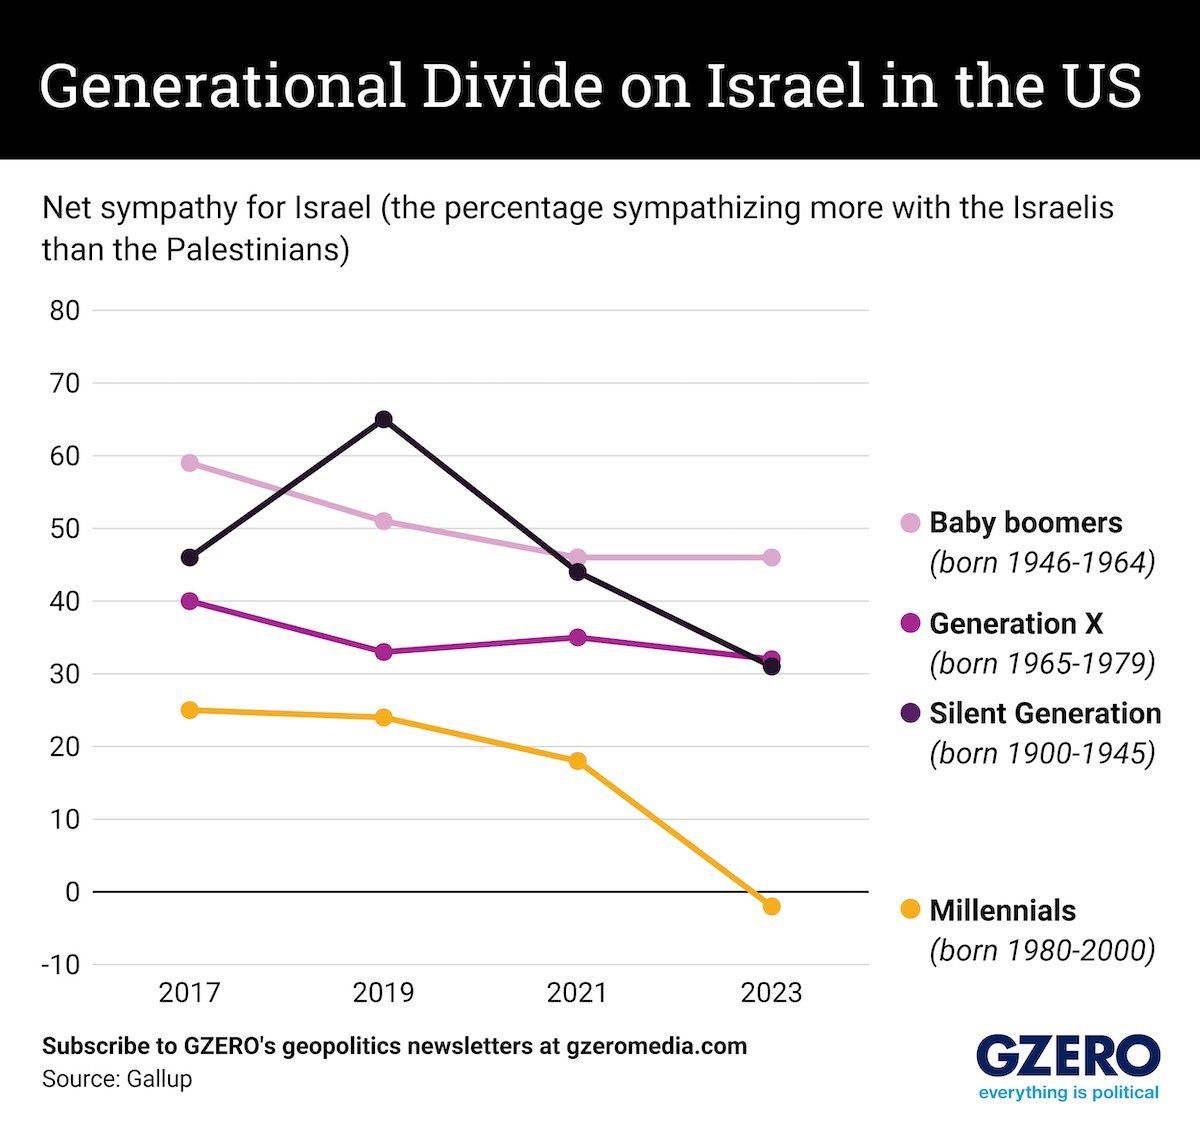 Graphic Truth: The generational divide over Israel in the US